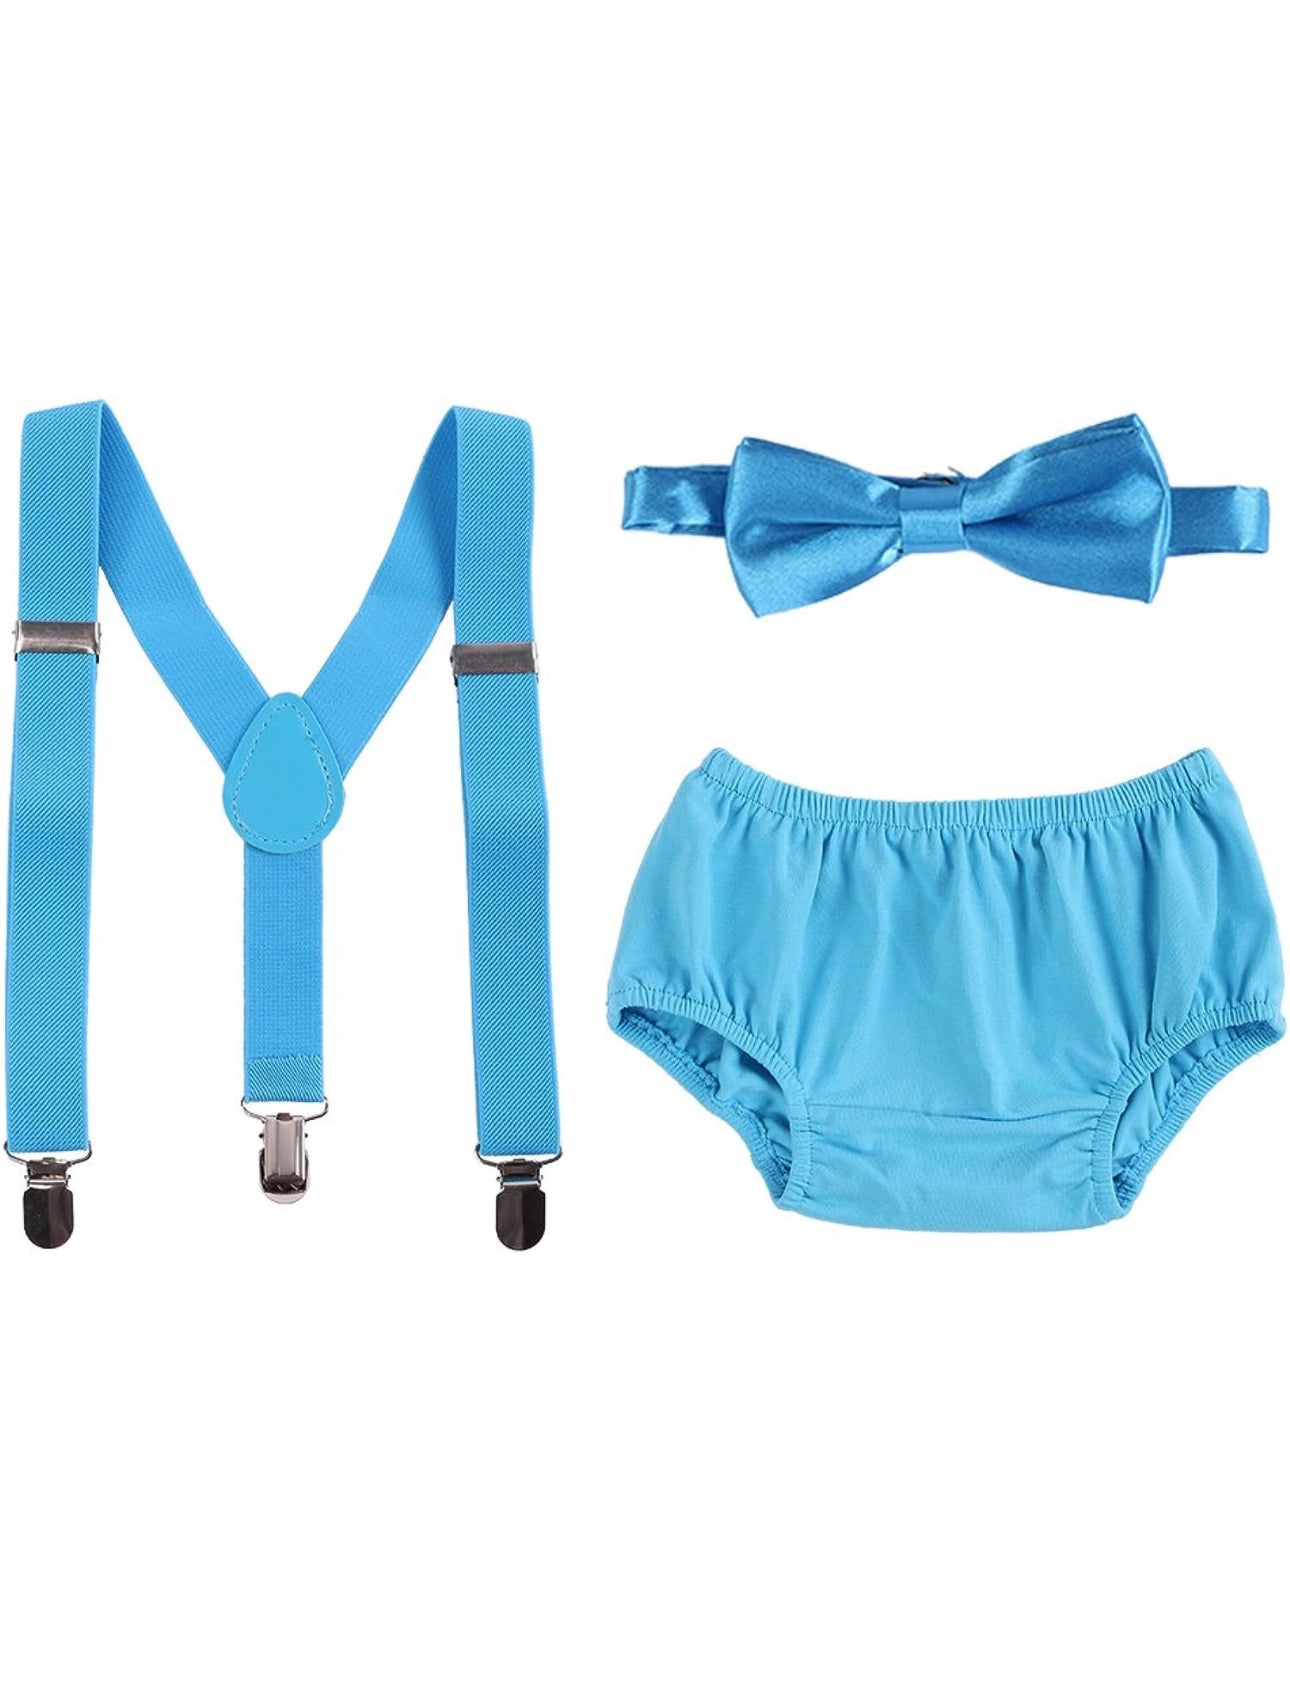 Baby Boy Smash Cake Bowtie Outfit